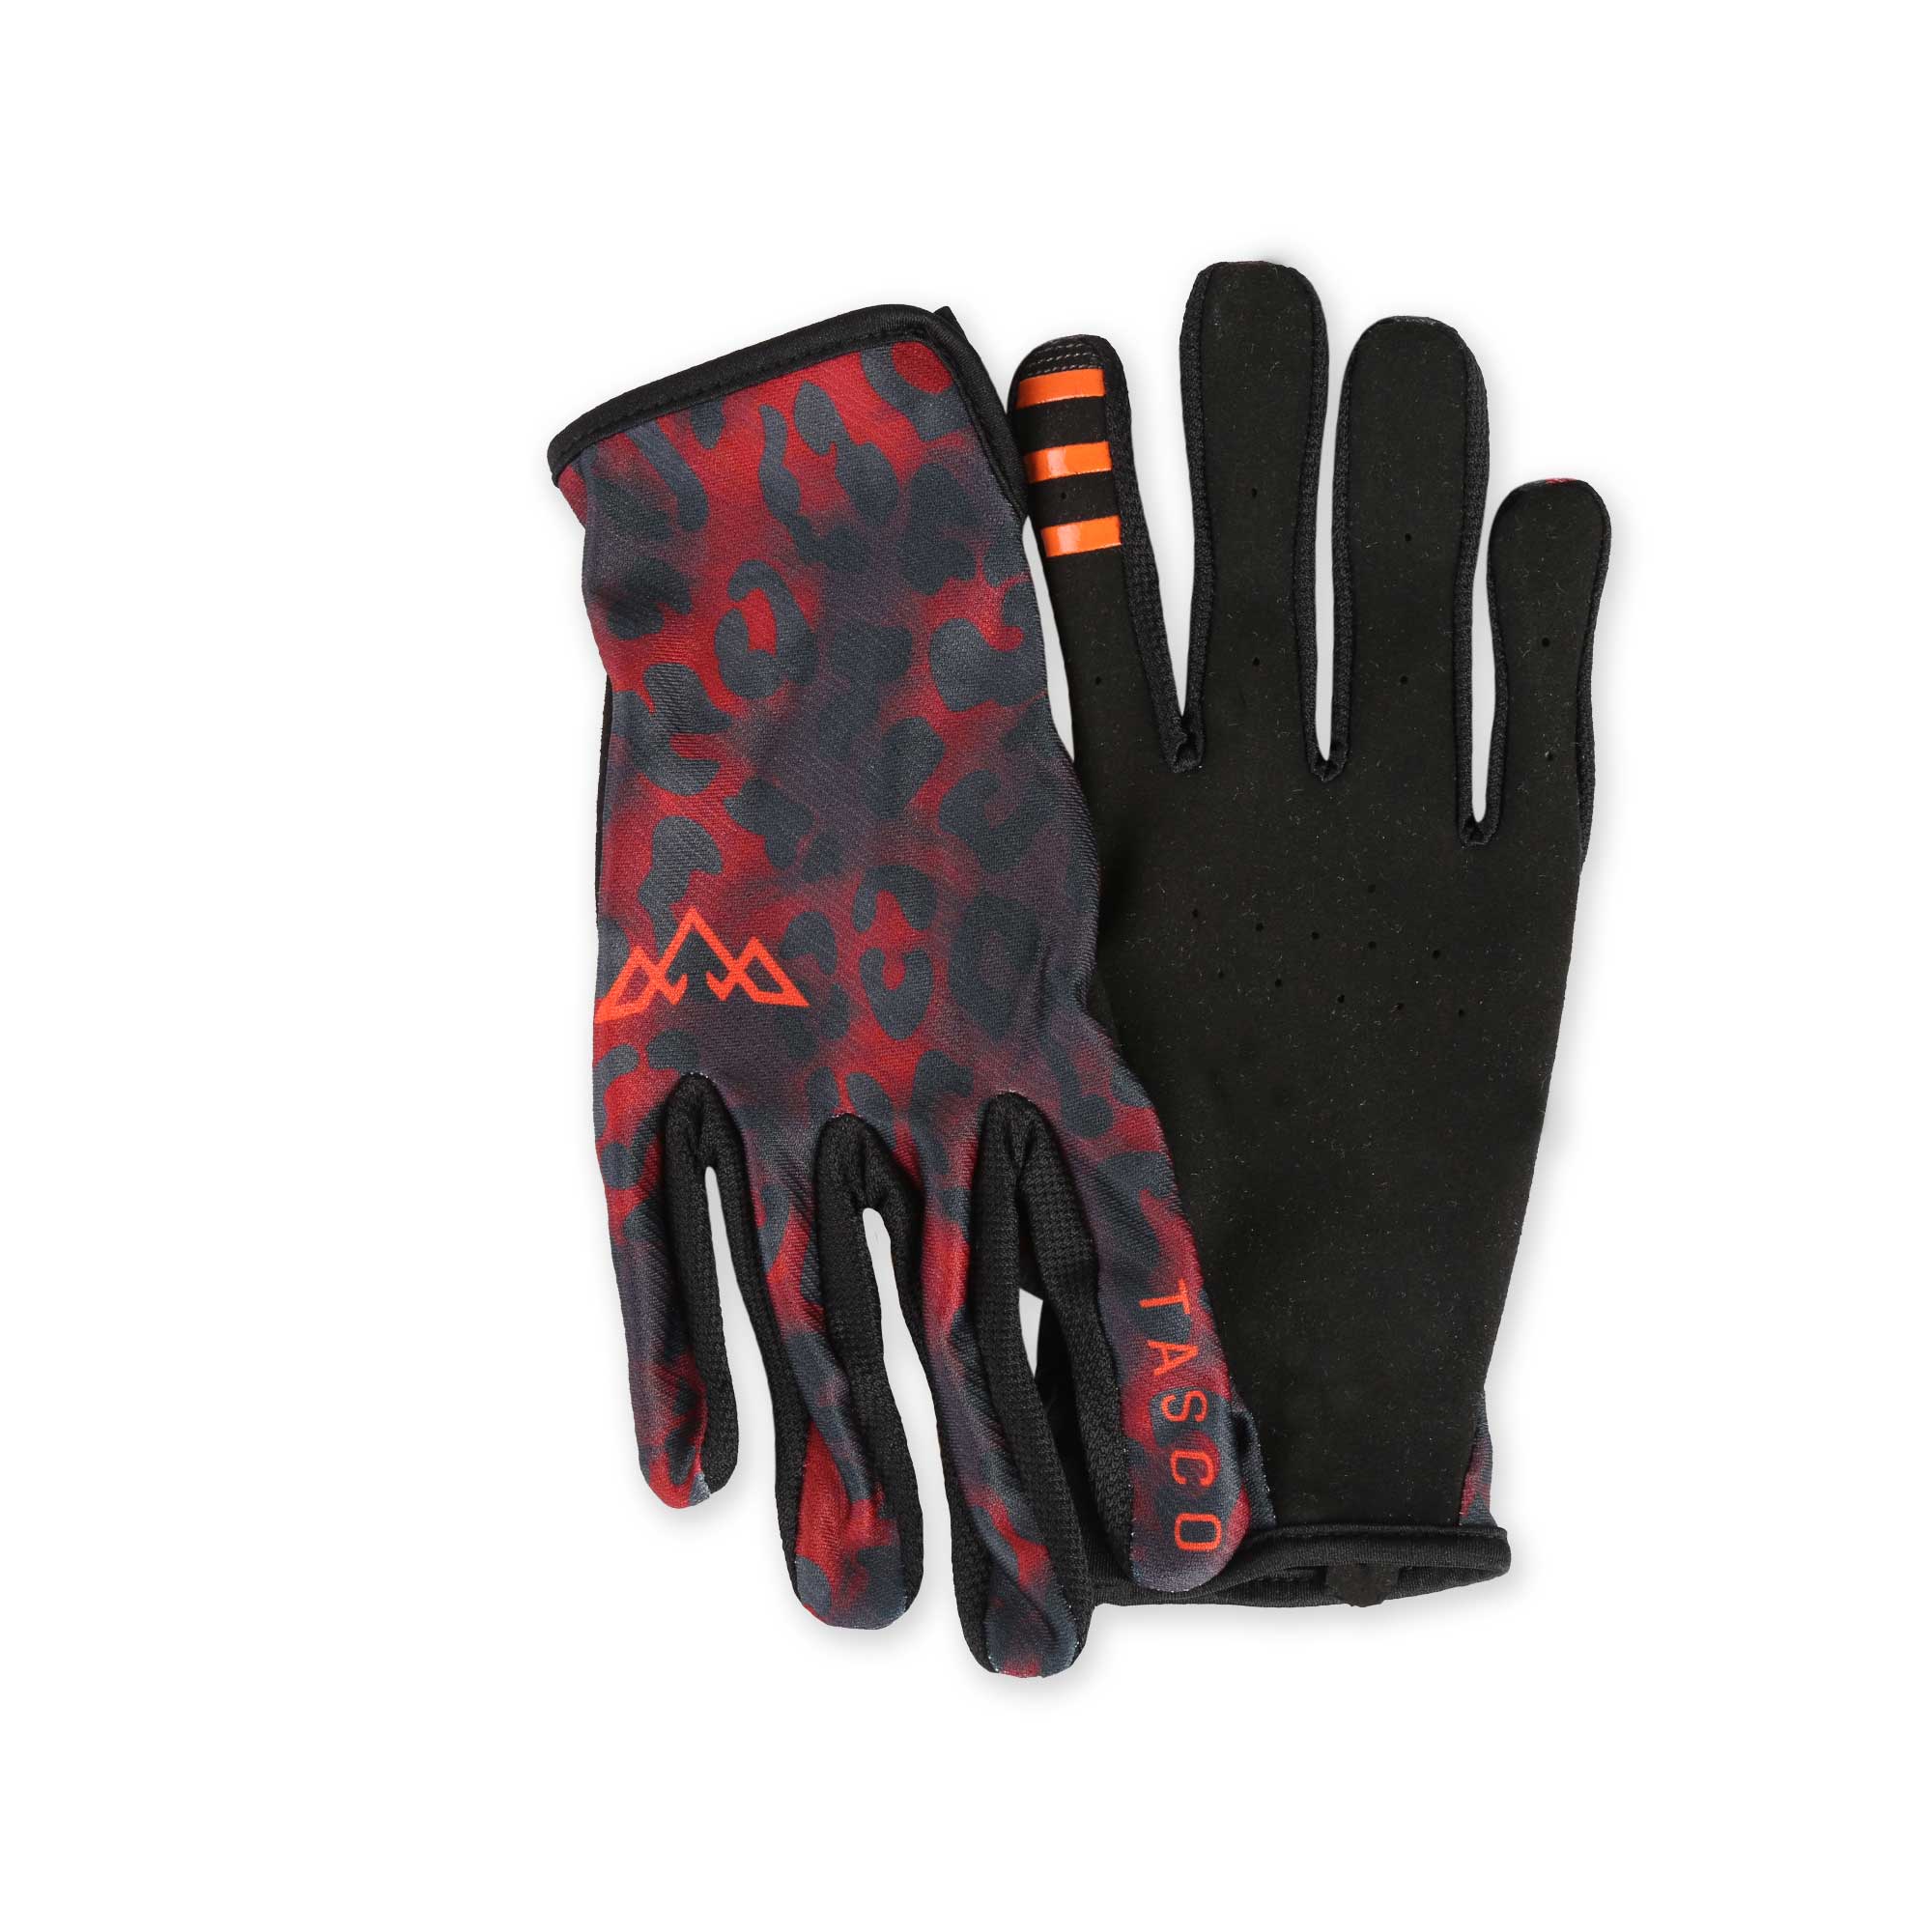 Wildside small batch glove and sock kit